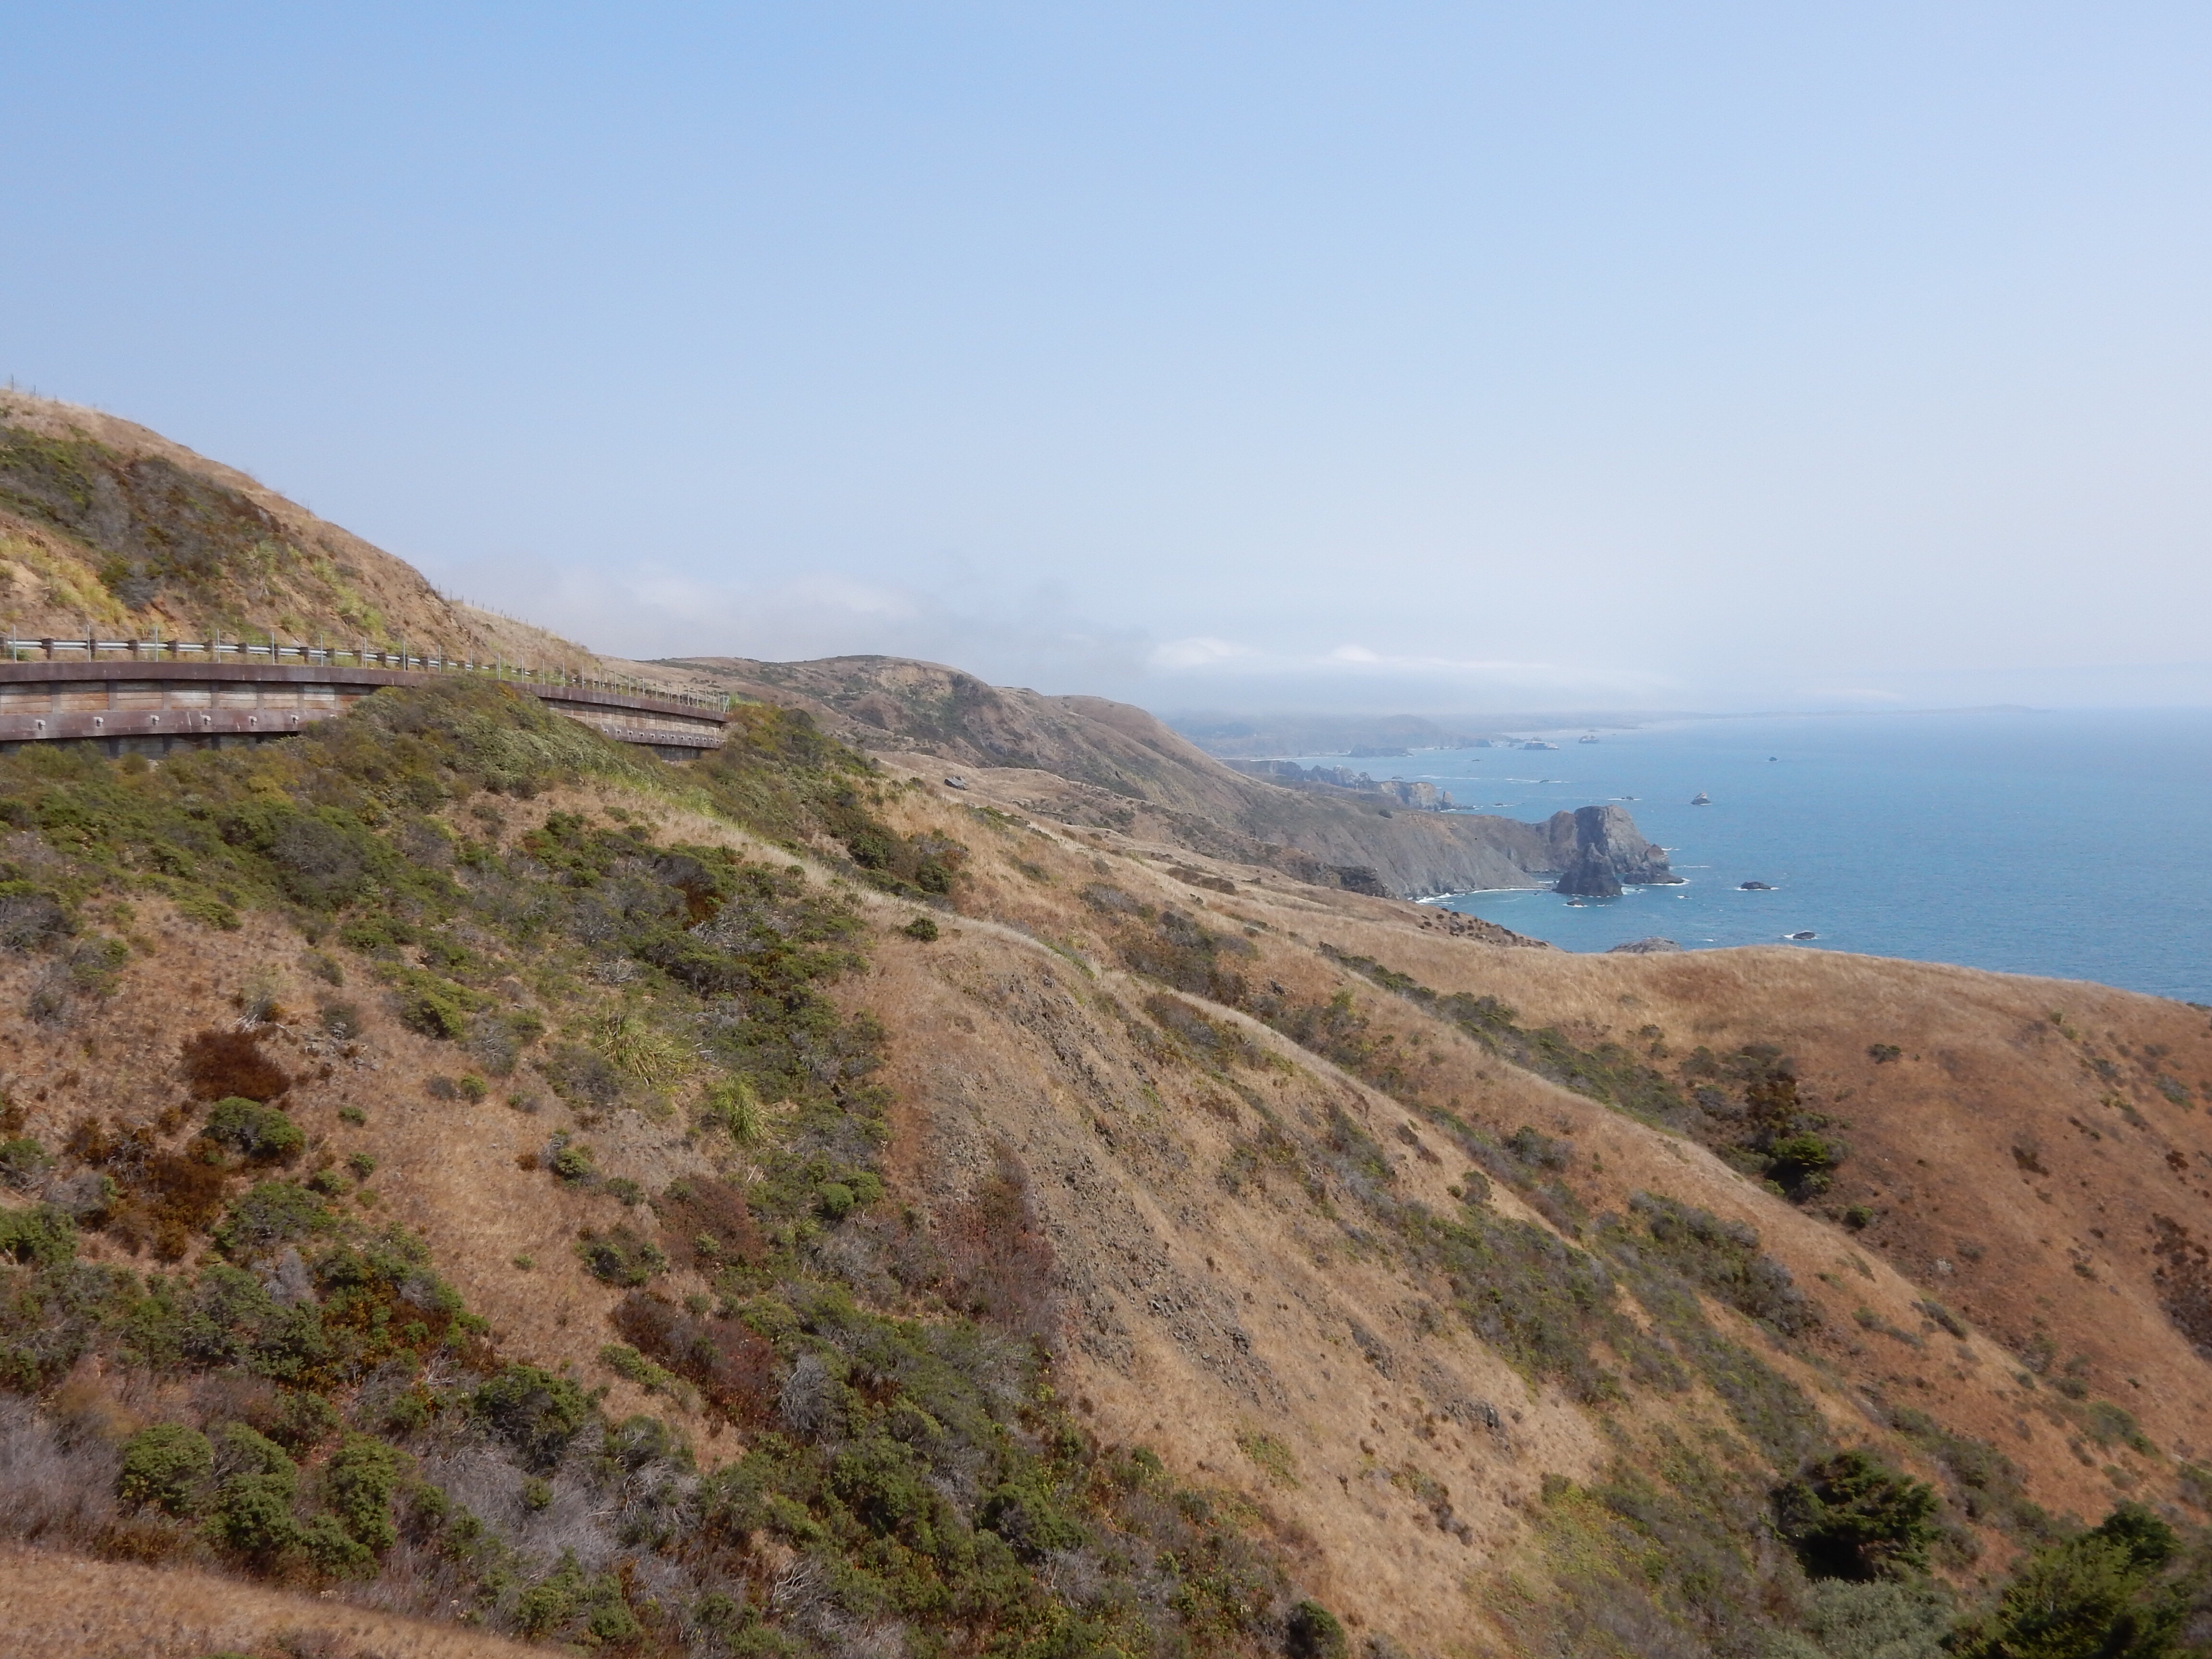 Looking south along the coast at Fort Ross State Historic Park.